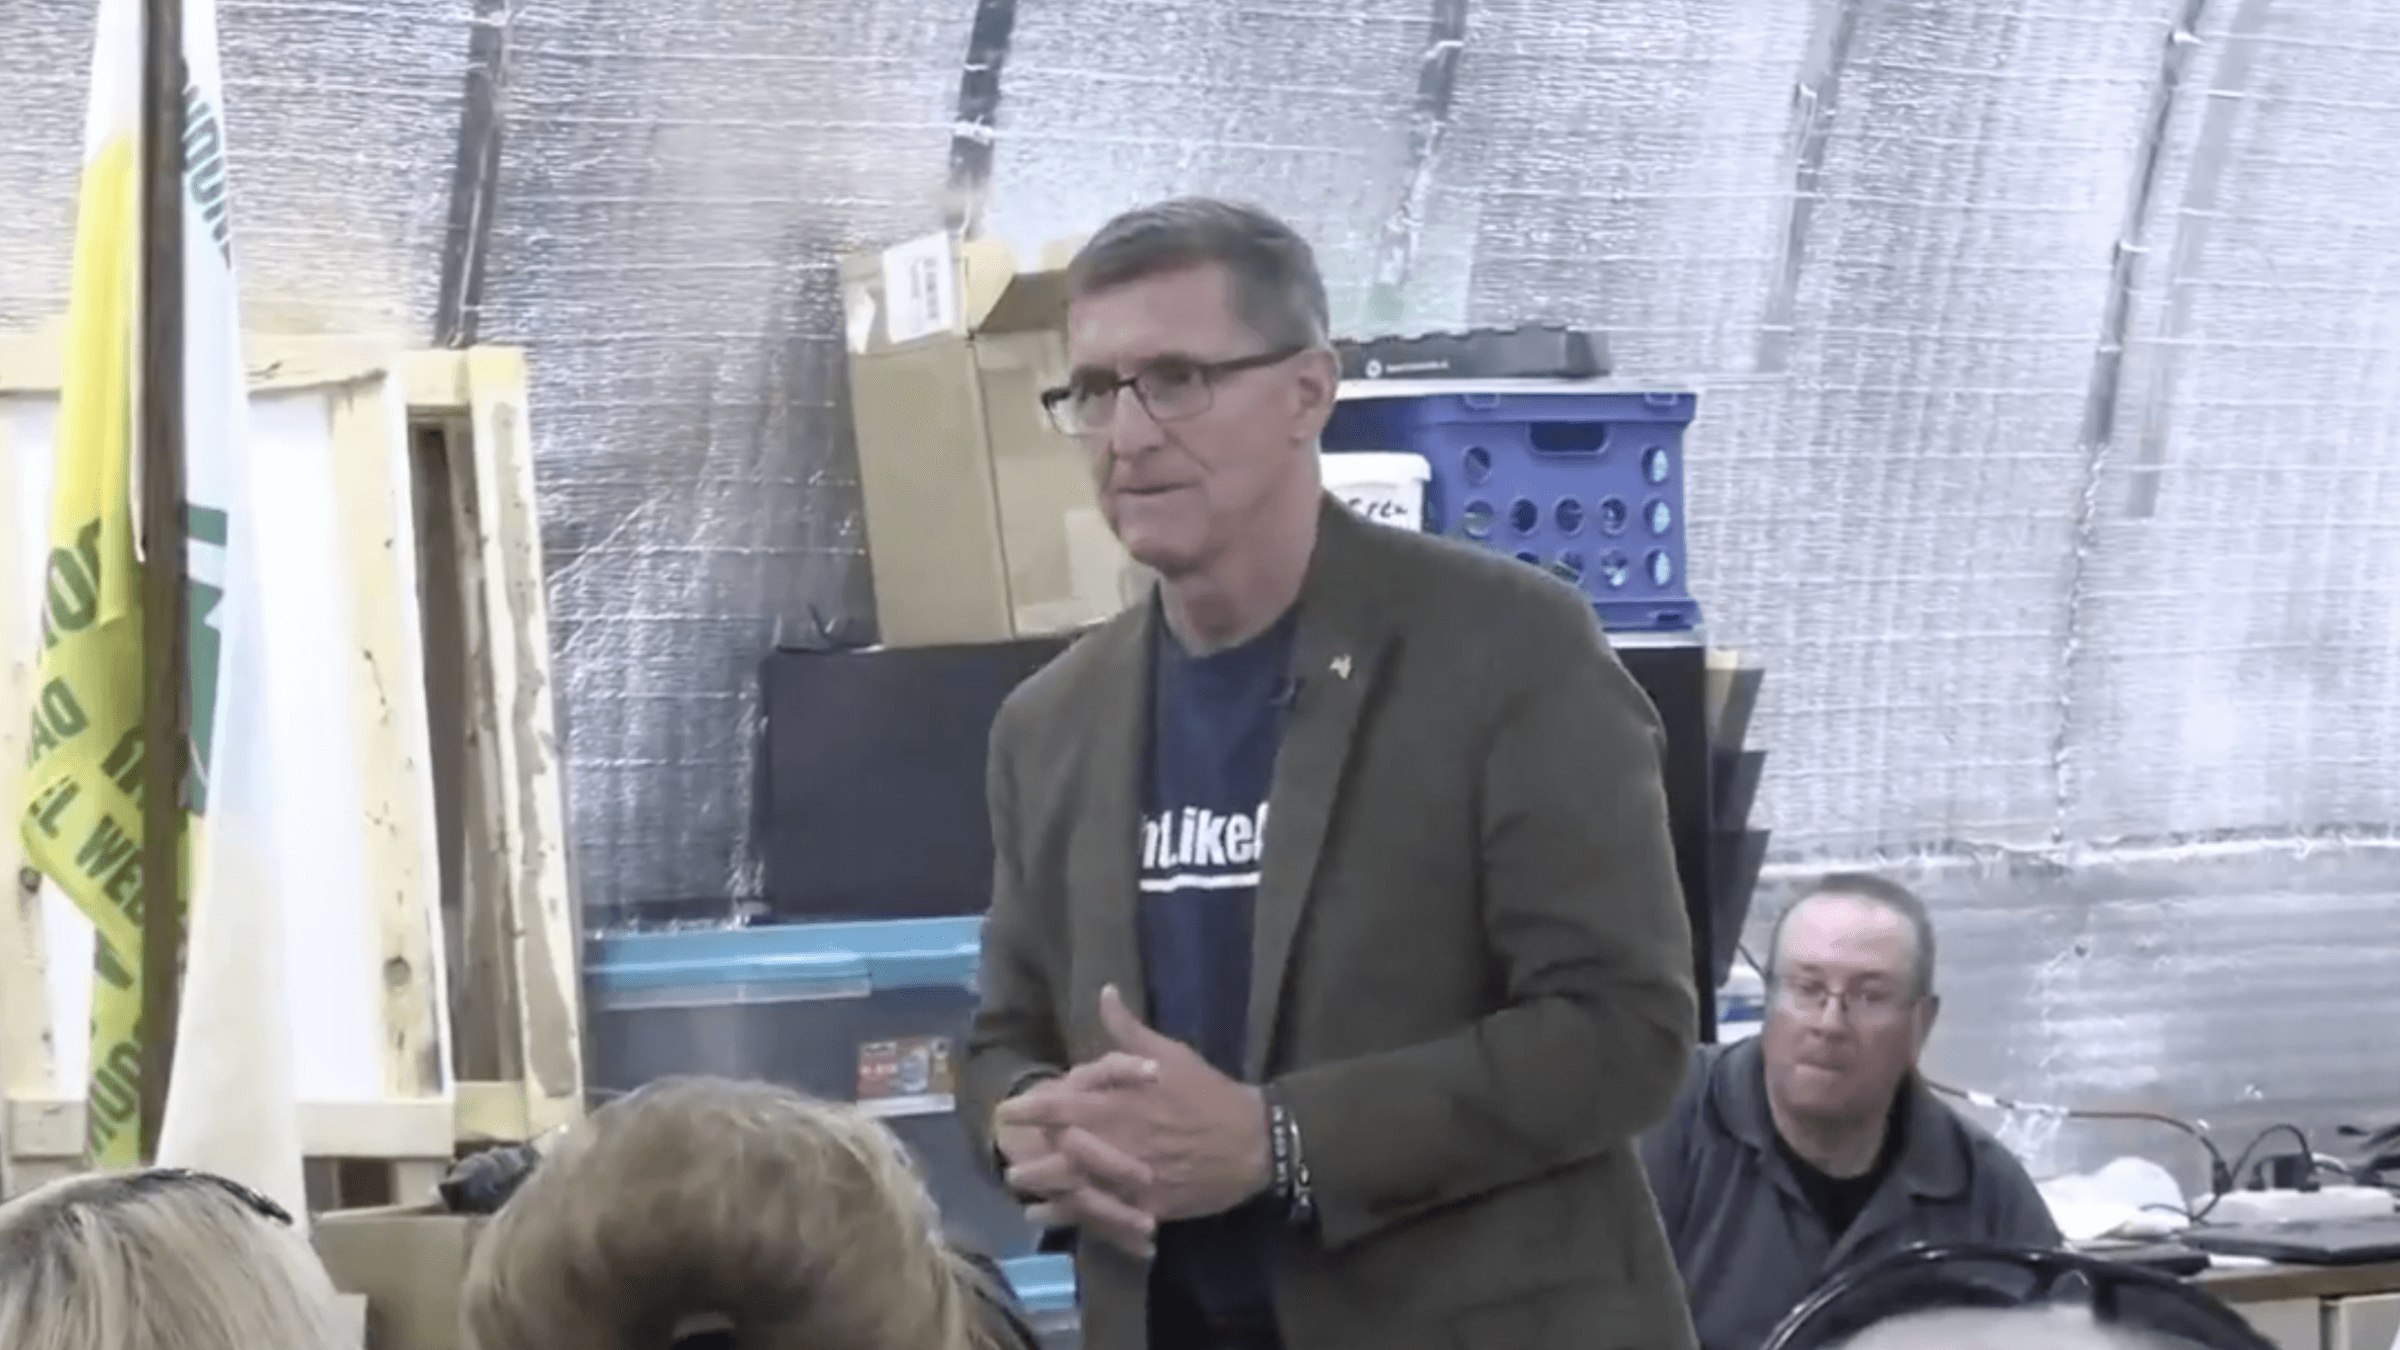 Michael Flynn, former national security advisor for former President Donald Trump, at campaign event for New Hampshire Senate candidate Don Bolduc on Oct. 6, 2021.